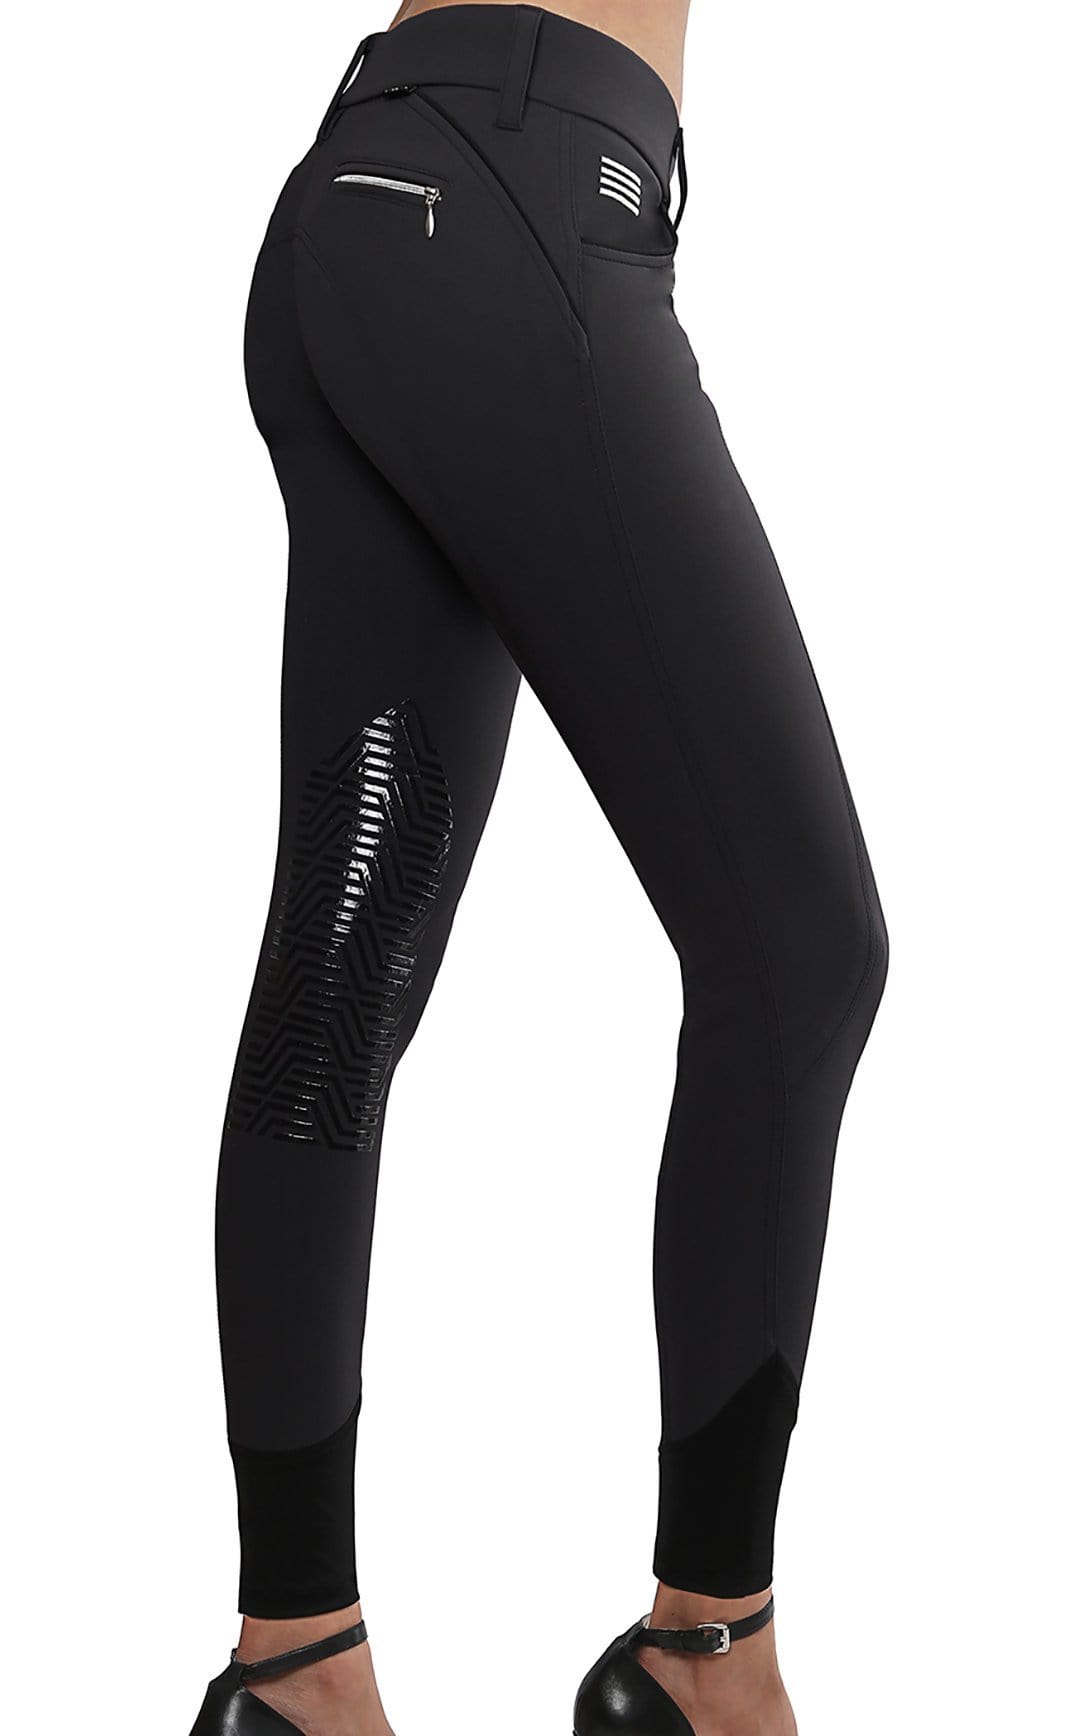 GhoDho Breeches GhoDho Aubrie Pro Black Breeches equestrian team apparel online tack store mobile tack store custom farm apparel custom show stable clothing equestrian lifestyle horse show clothing riding clothes horses equestrian tack store